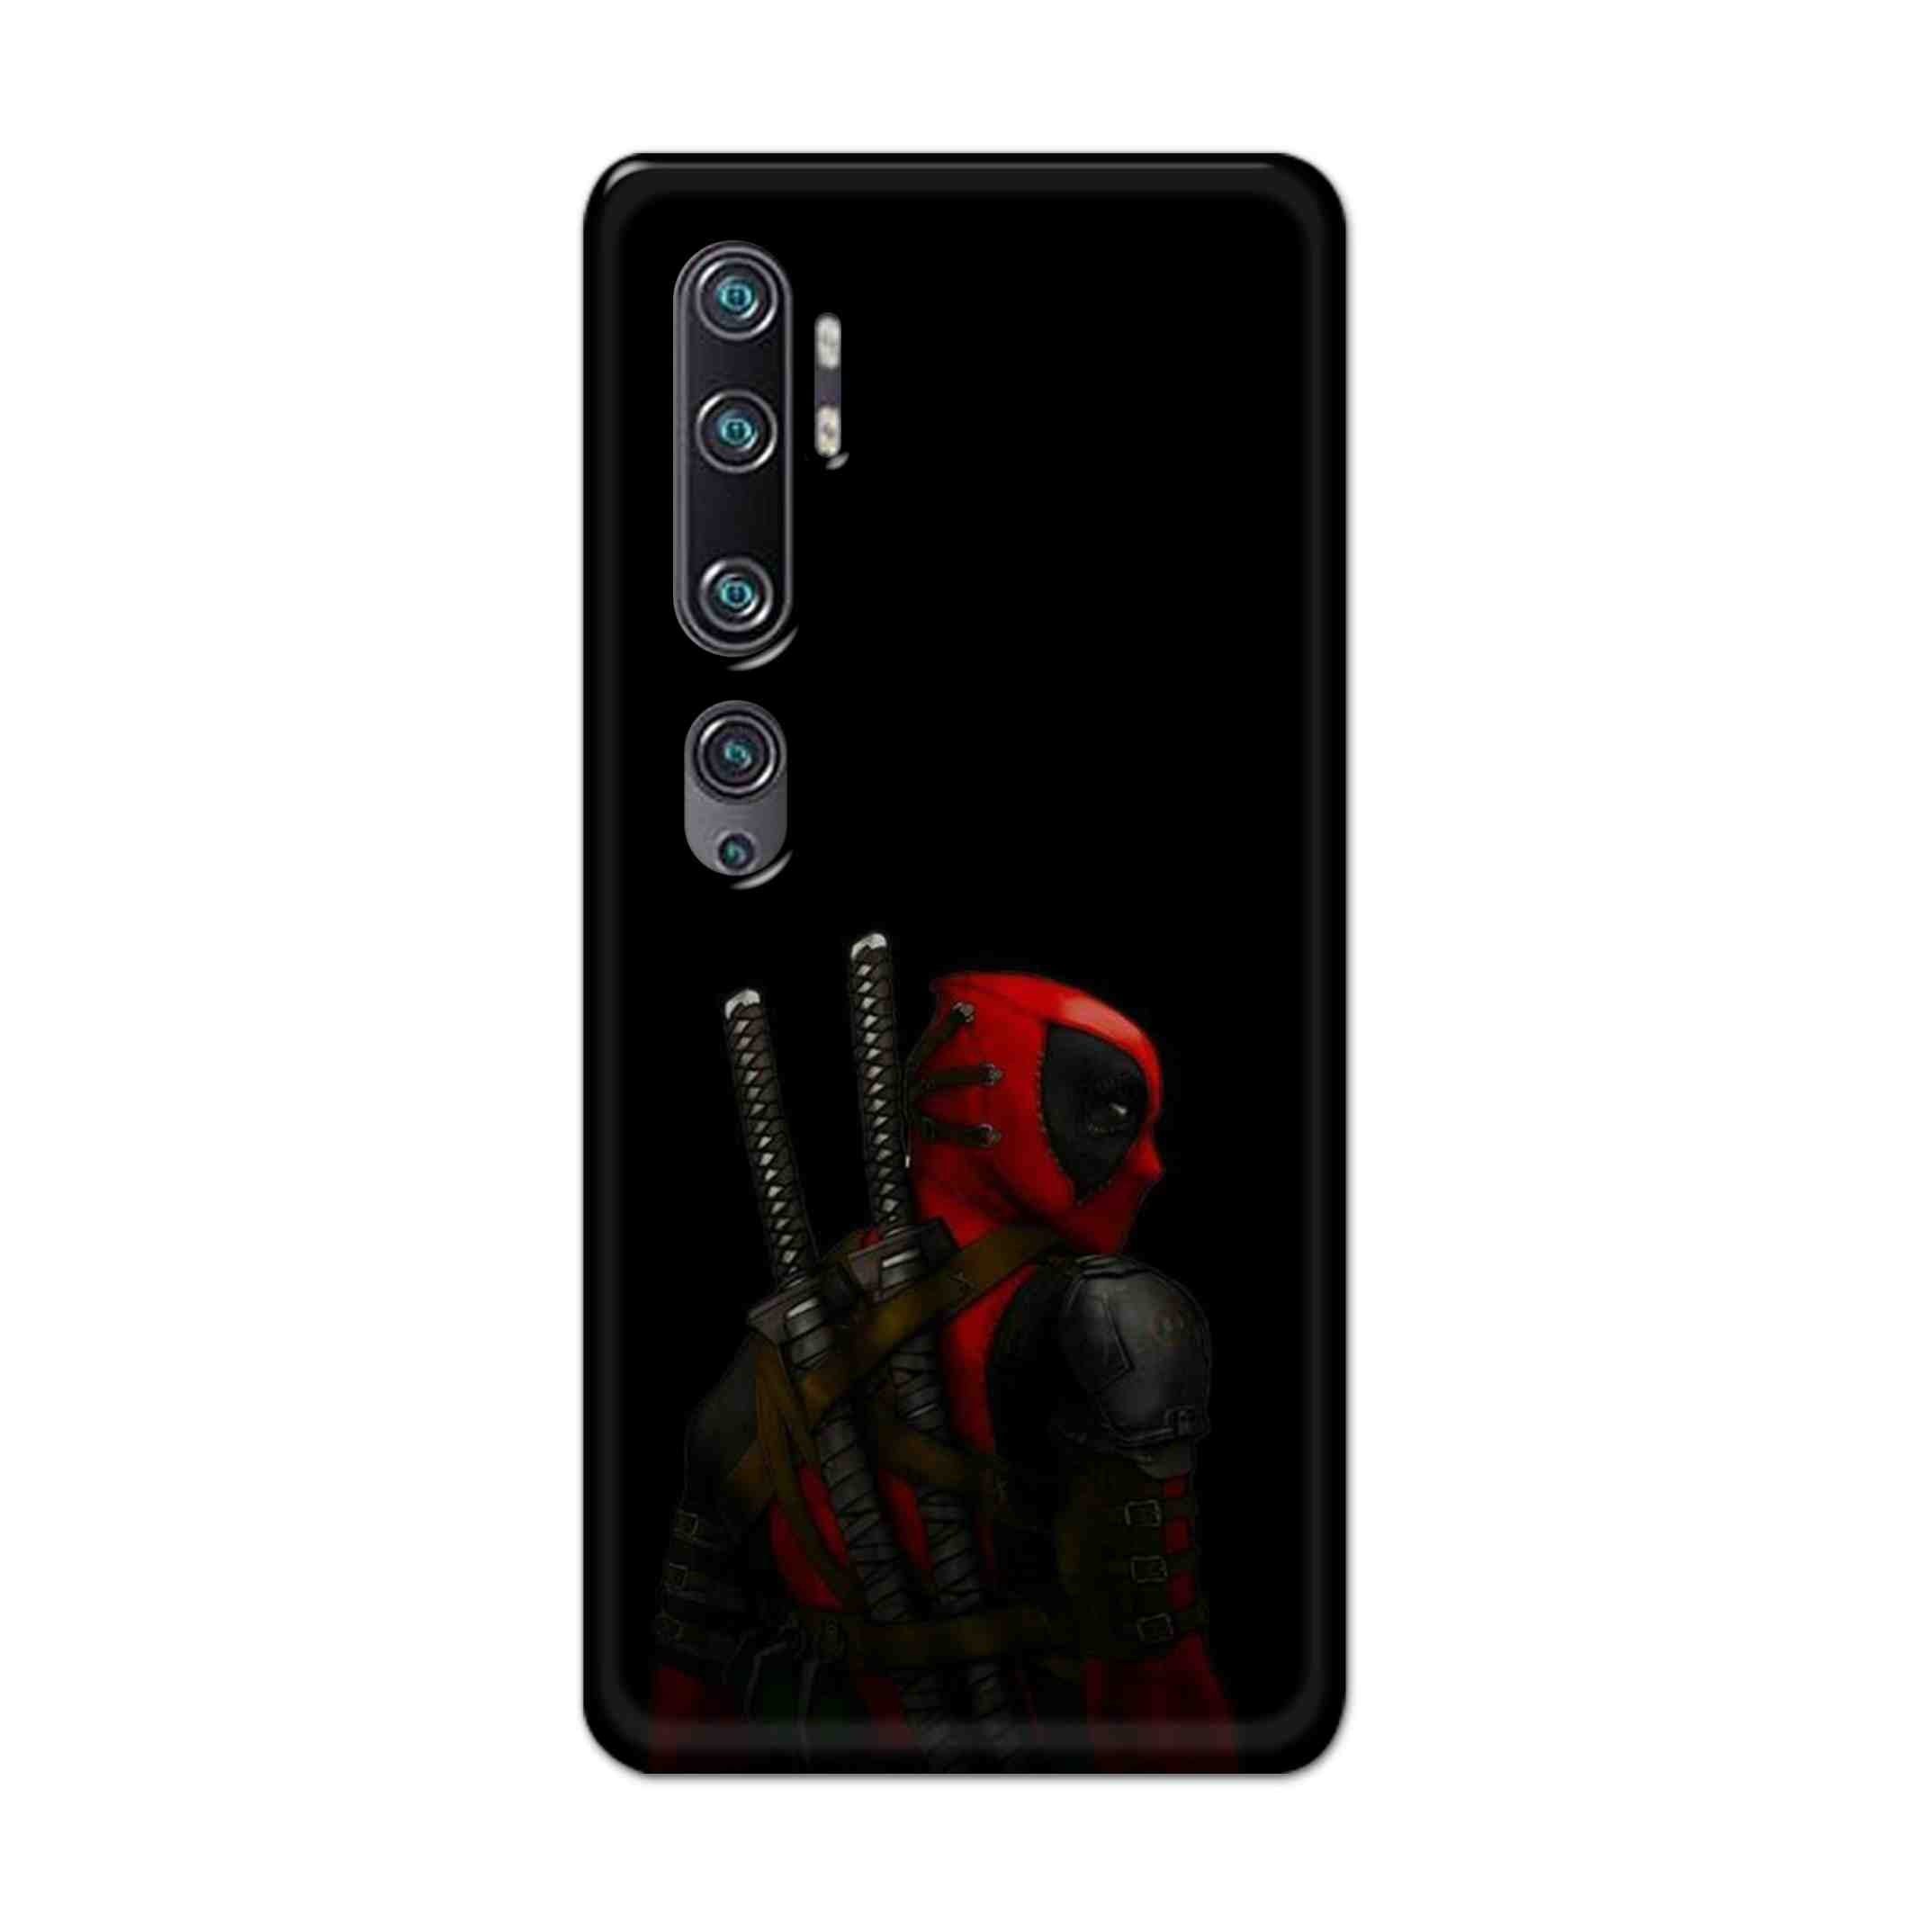 Buy Deadpool Hard Back Mobile Phone Case Cover For Xiaomi Mi Note 10 Online